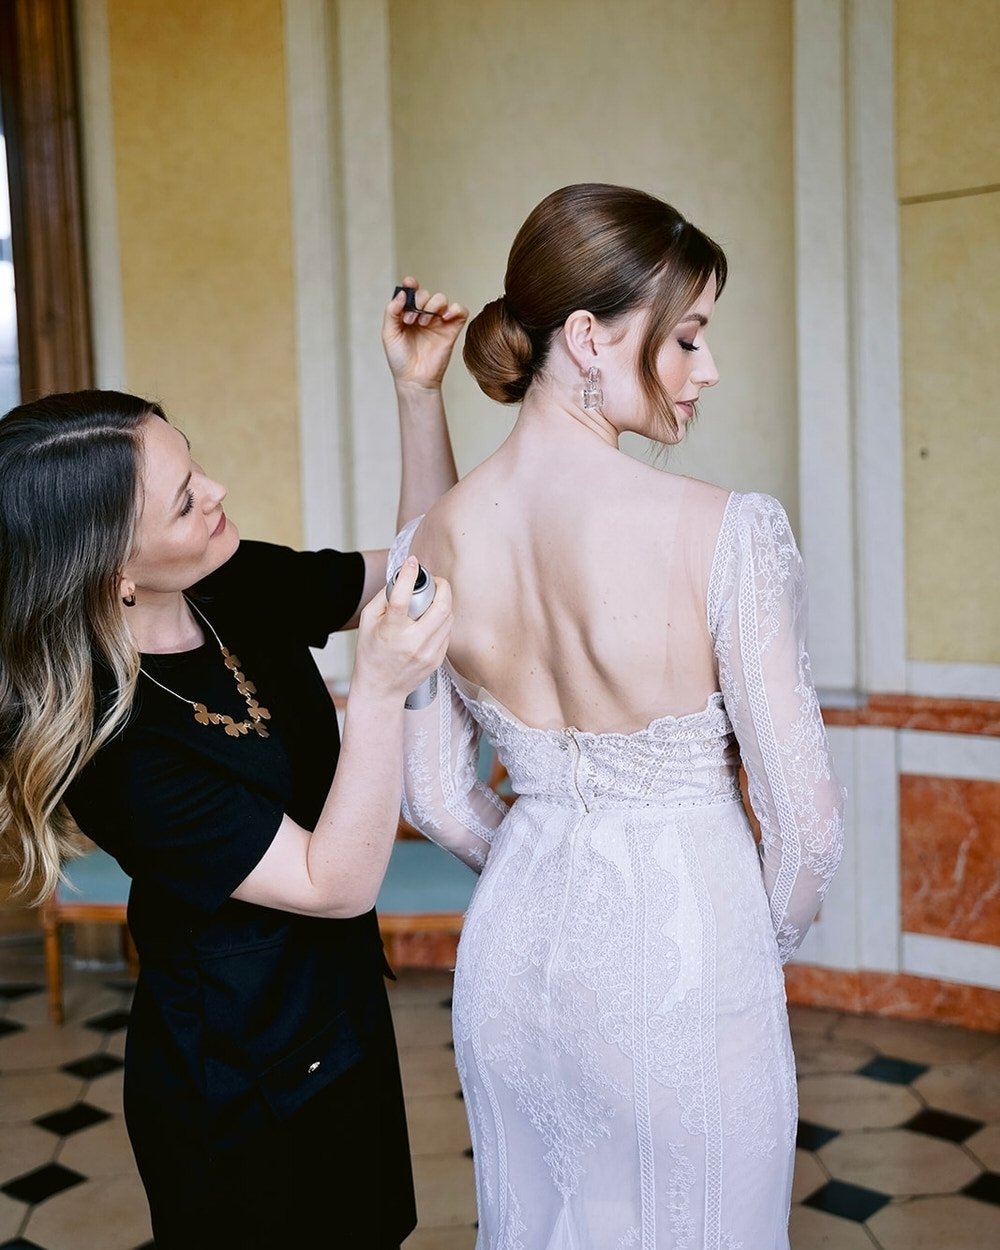 3 reasons why my brides choose this bridal hairstyle for their destination wedding in France:

1. It's a timeless style that adds instant elegance to any bridal look
2. It wears well in humidity, rain, wind, and hot temperatures
3. This hairstyle bri